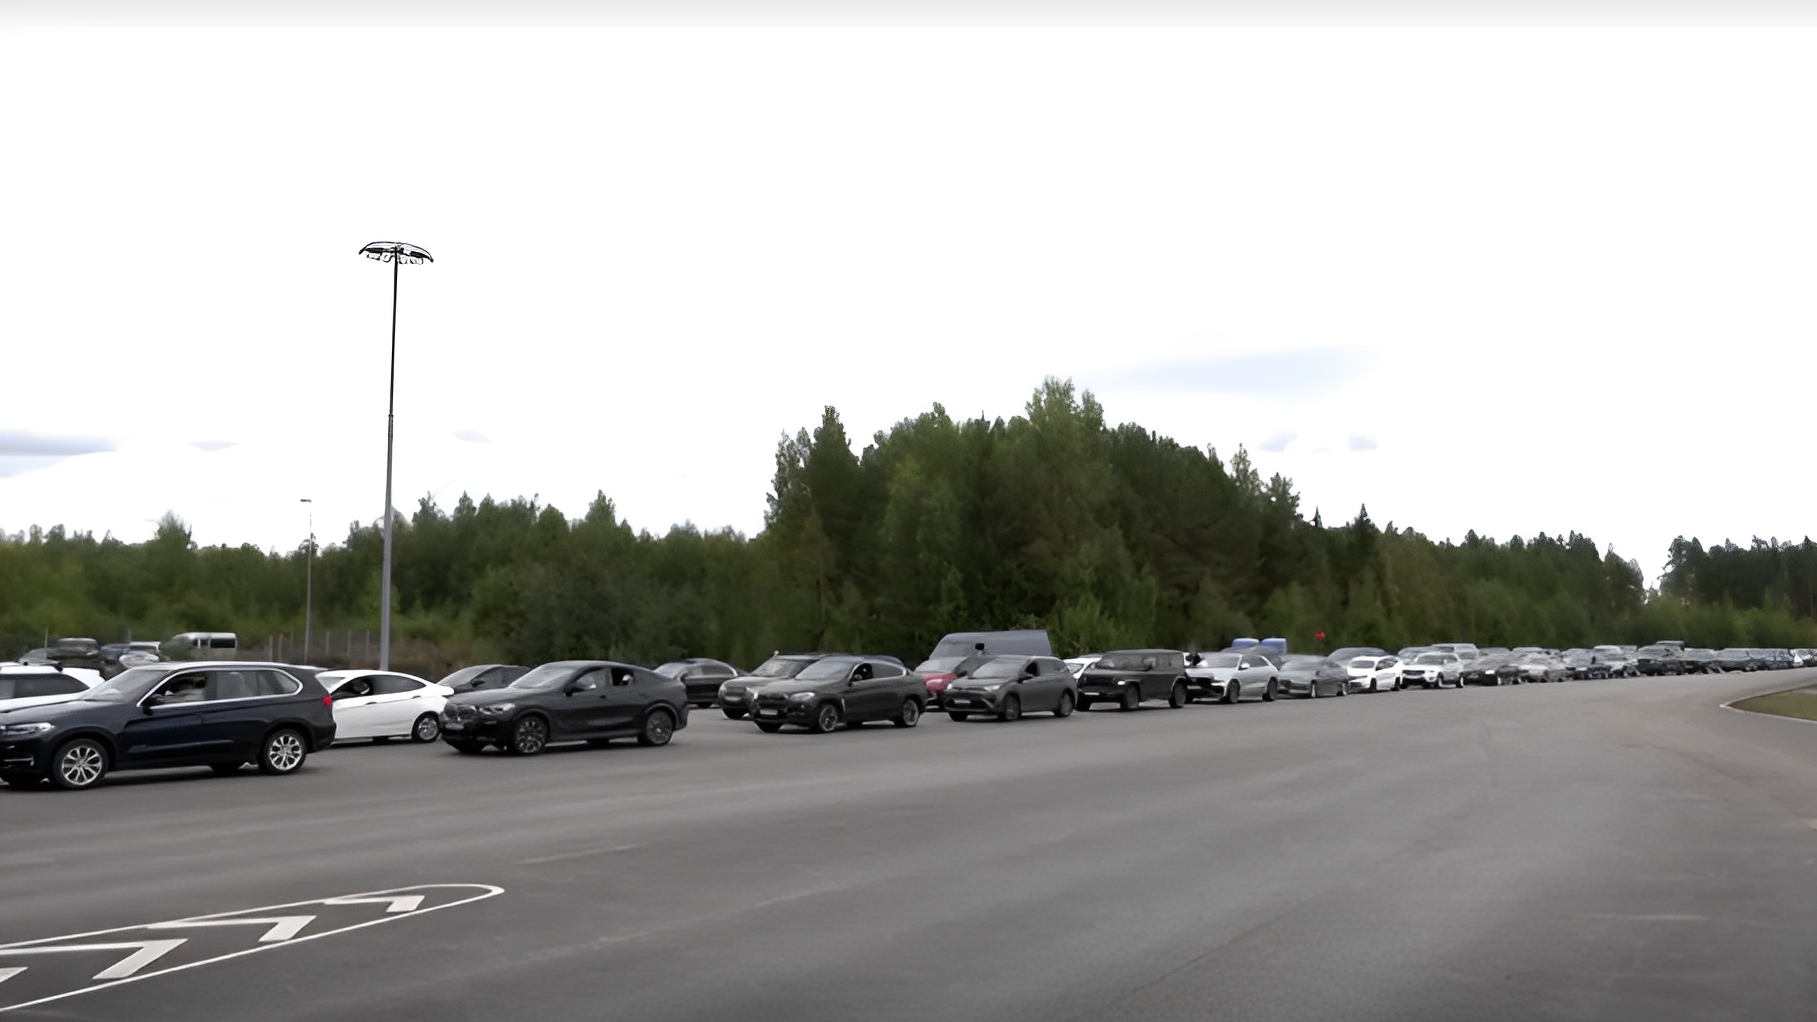 Kilometer traffic jam to leave Russia through Finland after Putin’s call-up